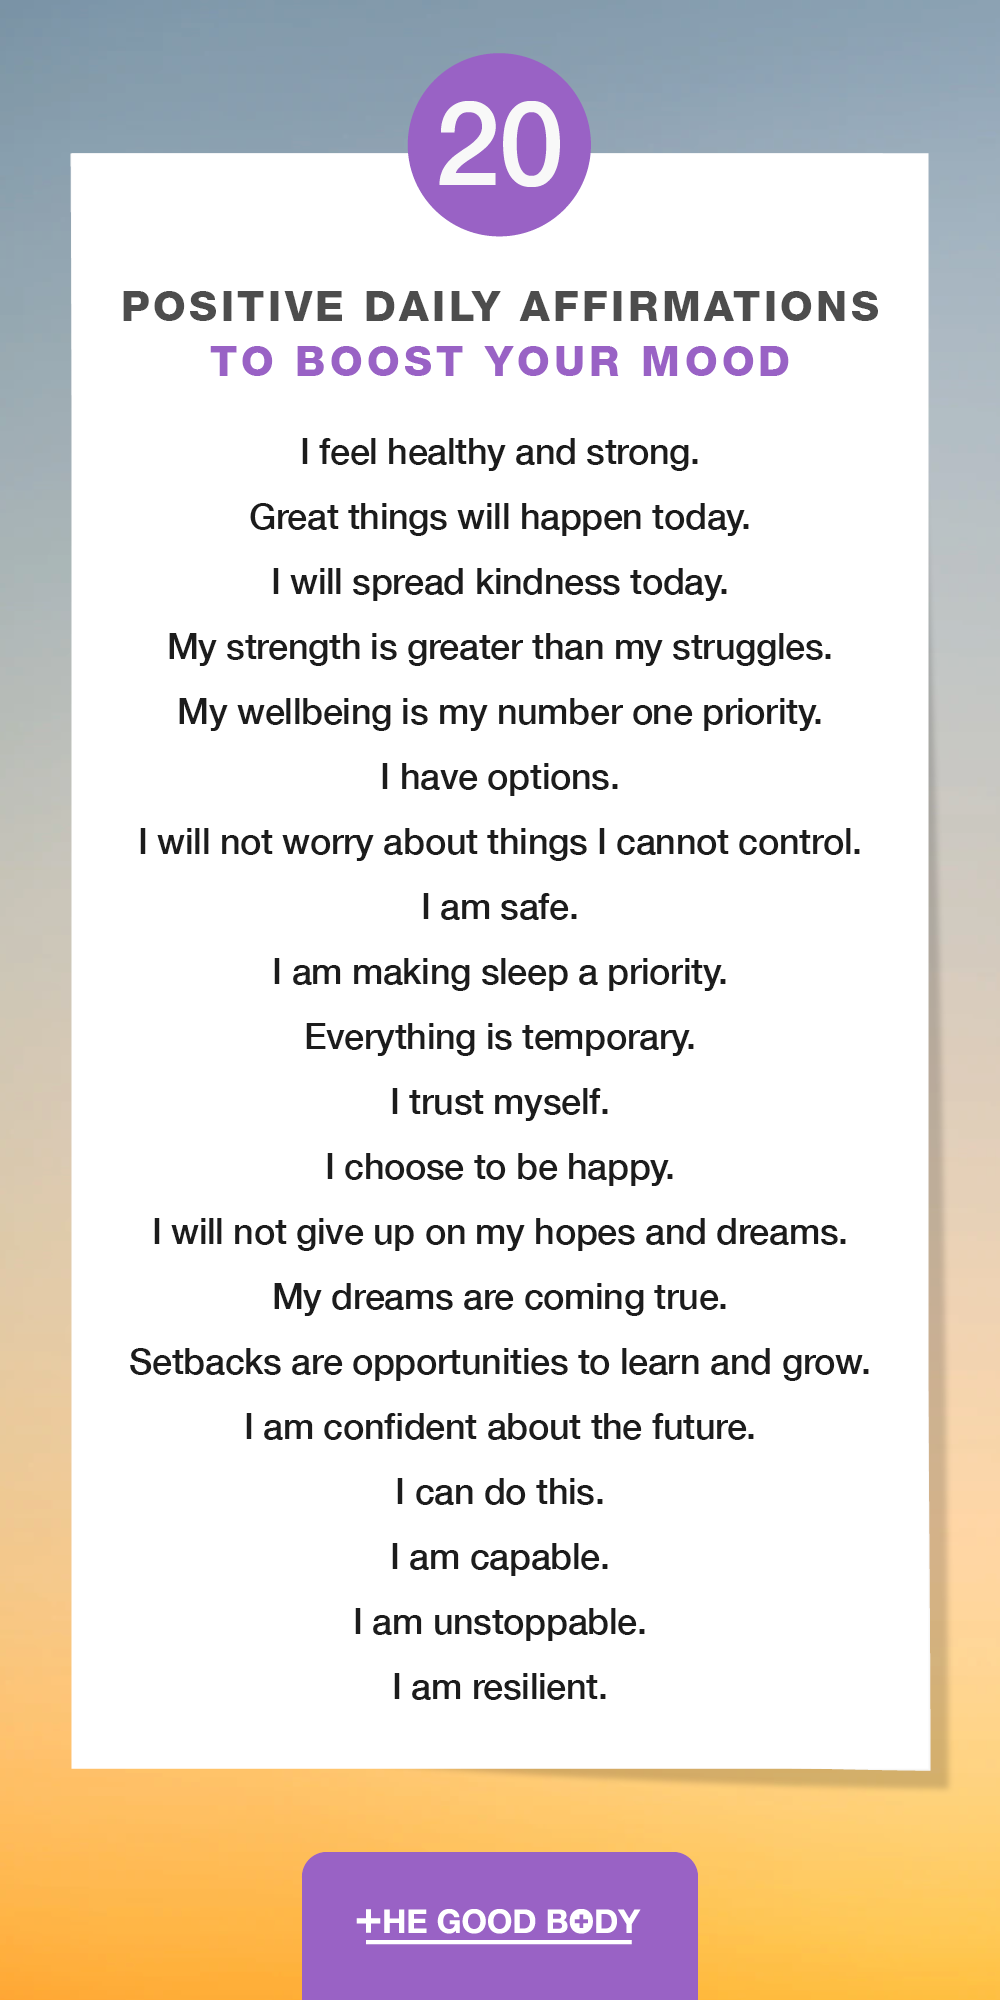 20 Positive Daily Affirmations to Boost Your Mood